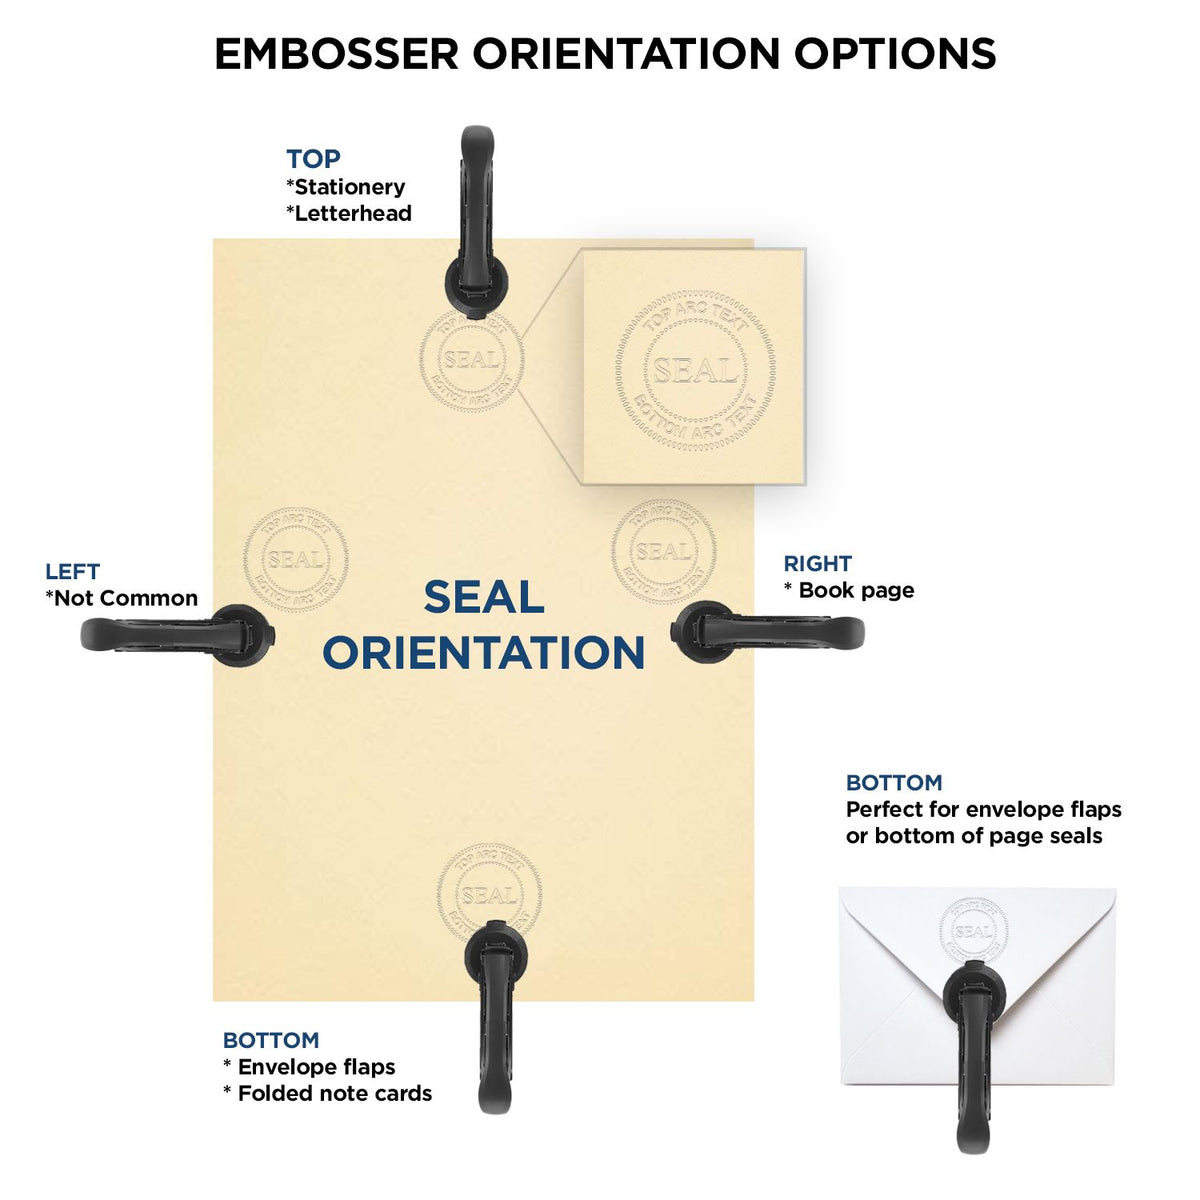 An infographic for the Handheld Alaska Professional Geologist Embosser showing embosser orientation, this is showing examples of a top, bottom, right and left insert.